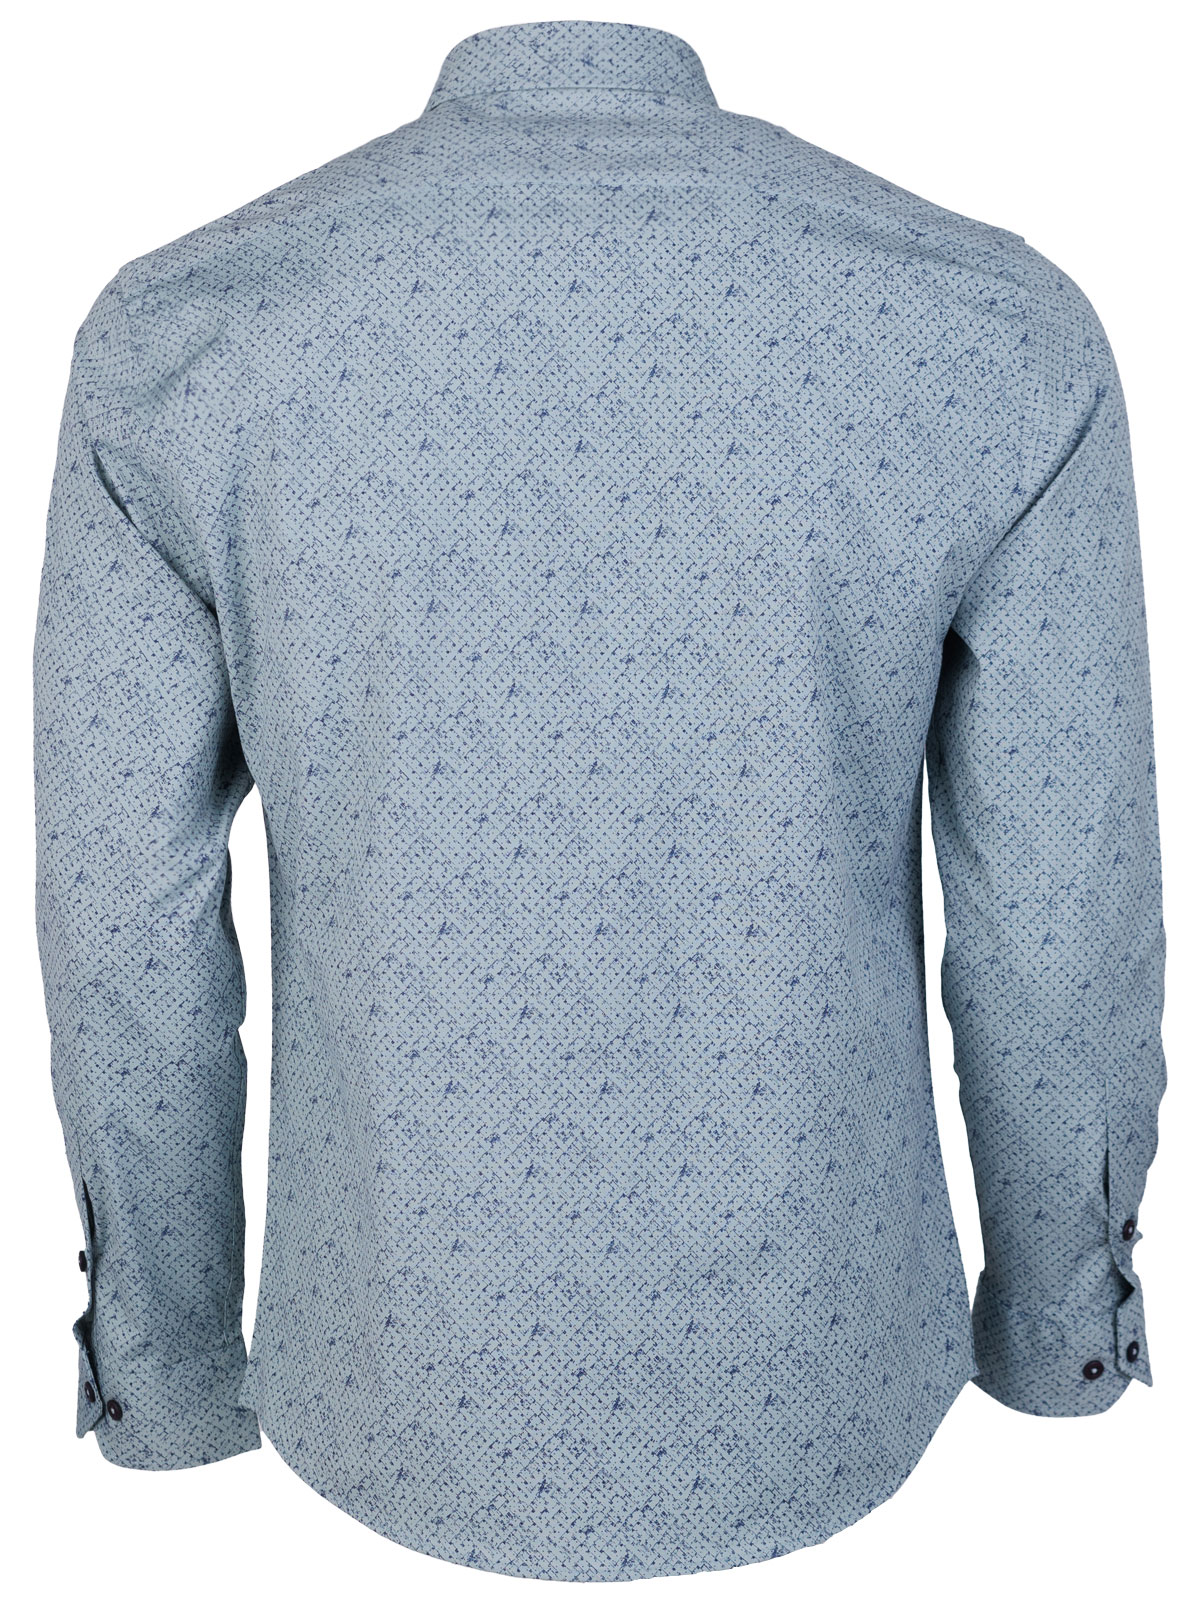 Mens shirt in mint color with figures - 21613 € 44.43 img2